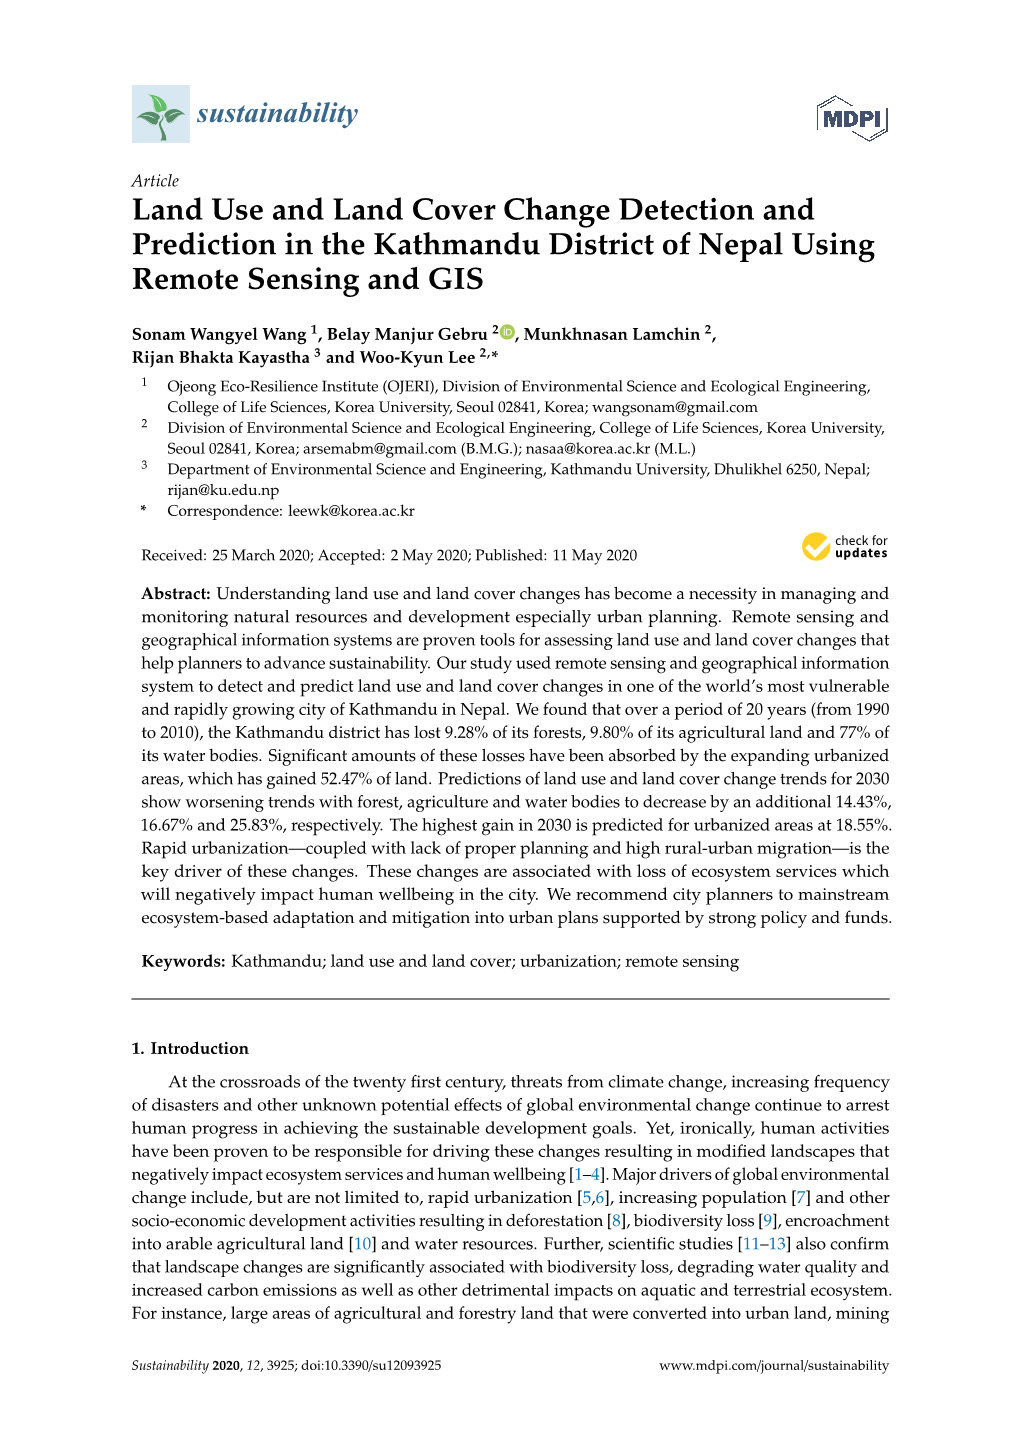 Land Use and Land Cover Change Detection and Prediction in the Kathmandu District of Nepal Using Remote Sensing and GIS